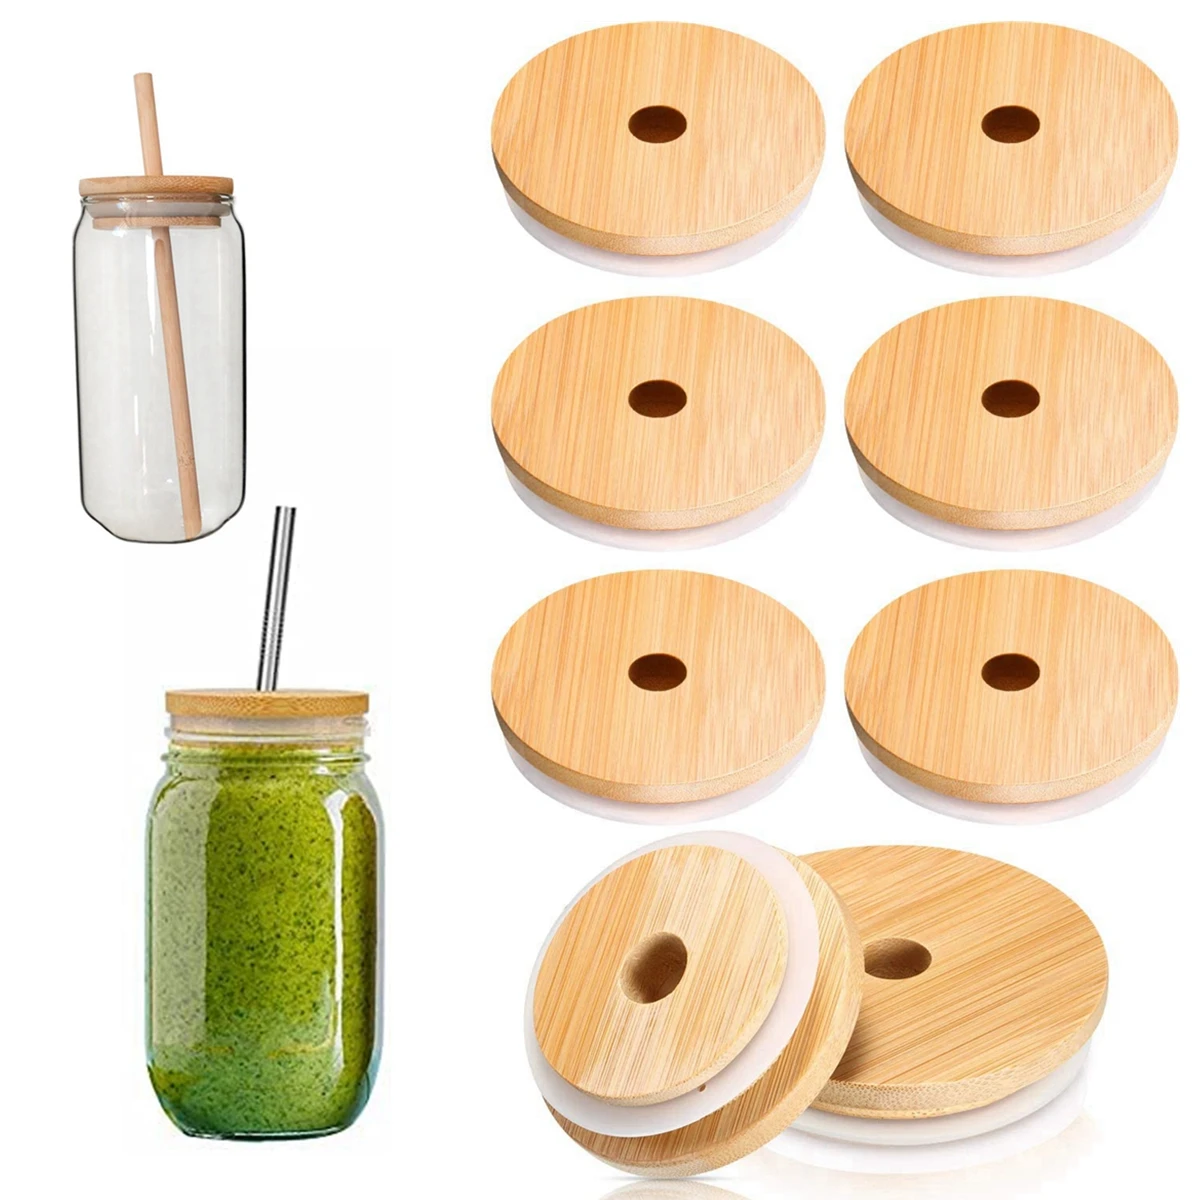 16 Oz Mason Jar Regular Mouth Beverage Cups with Bamboo Lids and